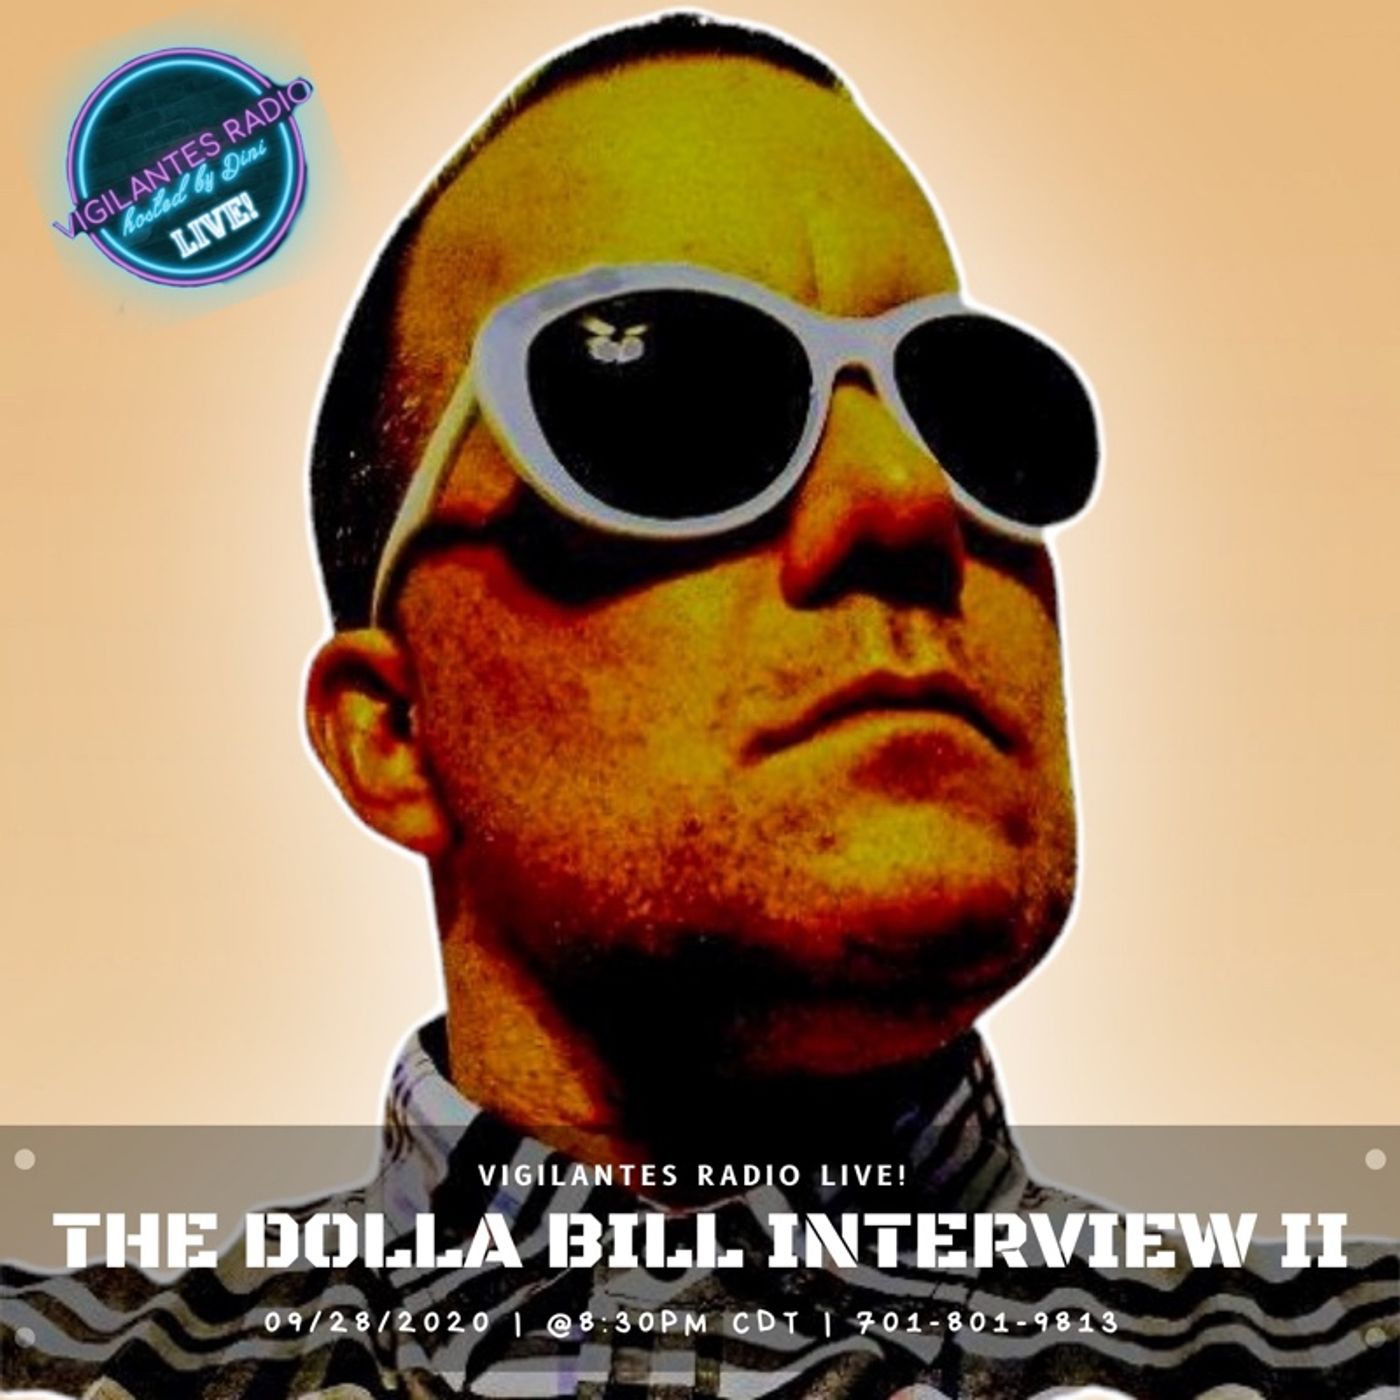 The Dolla Bill Interview II. Image